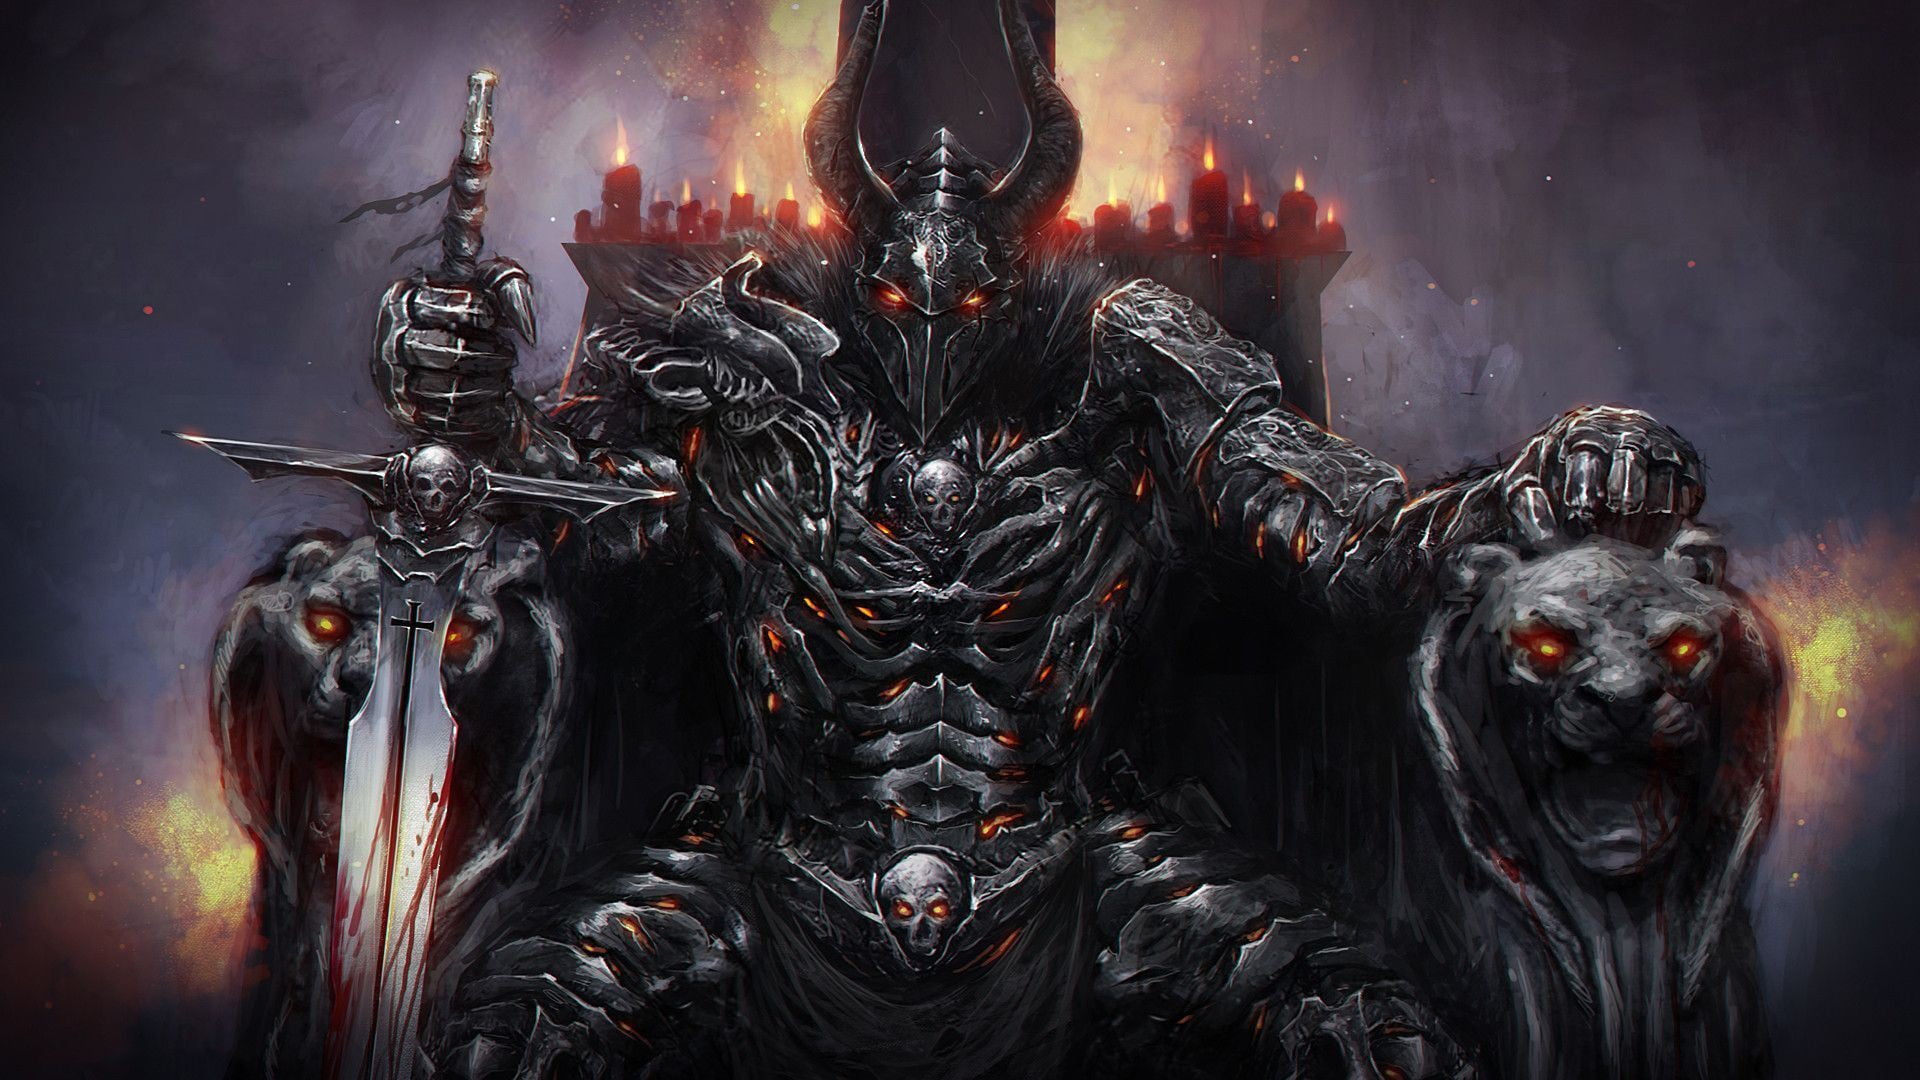 Download King of Curses, Sukuna Occupying His Throne Wallpaper | Wallpapers .com